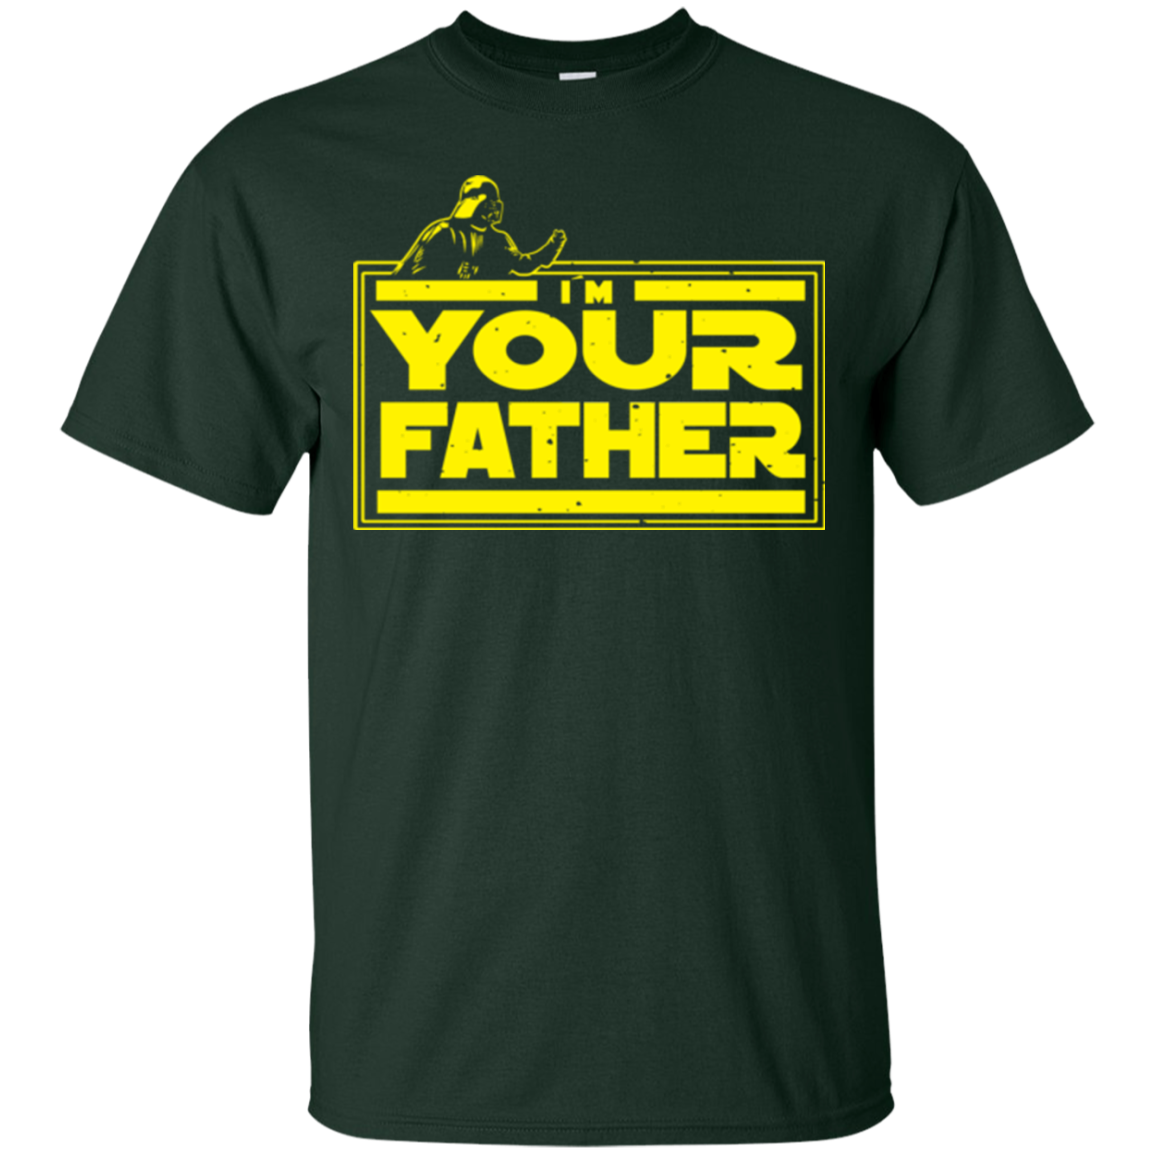 I M Your Father T-Shirt